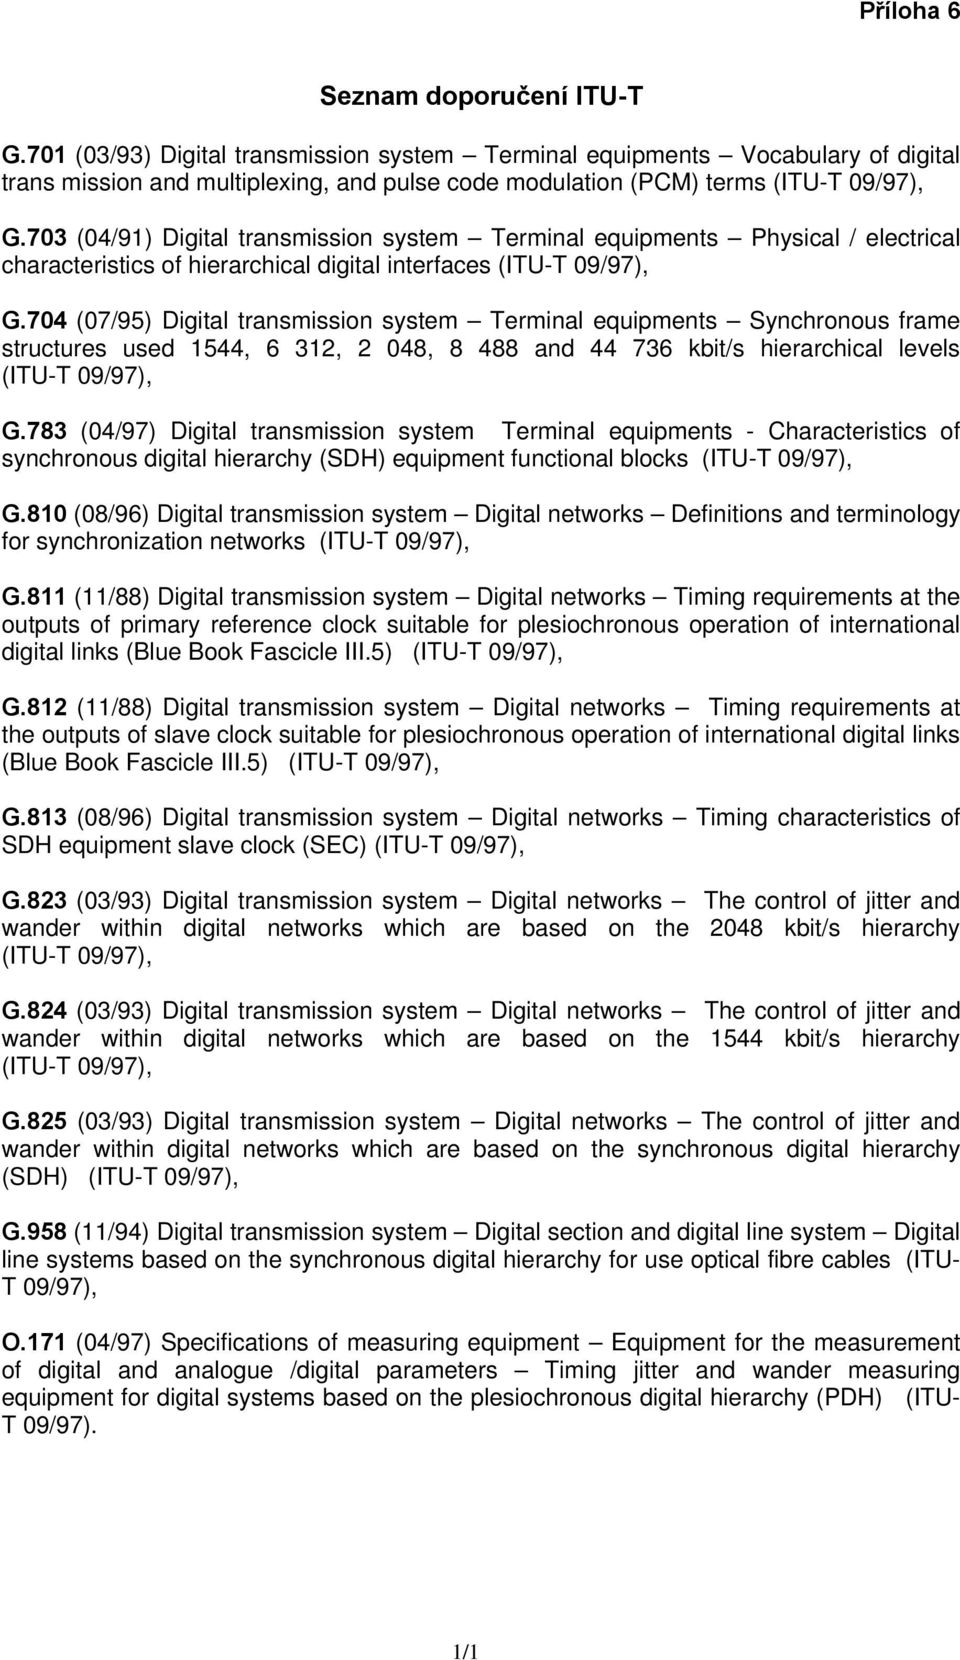 703 (04/91) Digital transmission system Terminal equipments Physical / electrical characteristics of hierarchical digital interfaces (ITU-T 09/97), G.